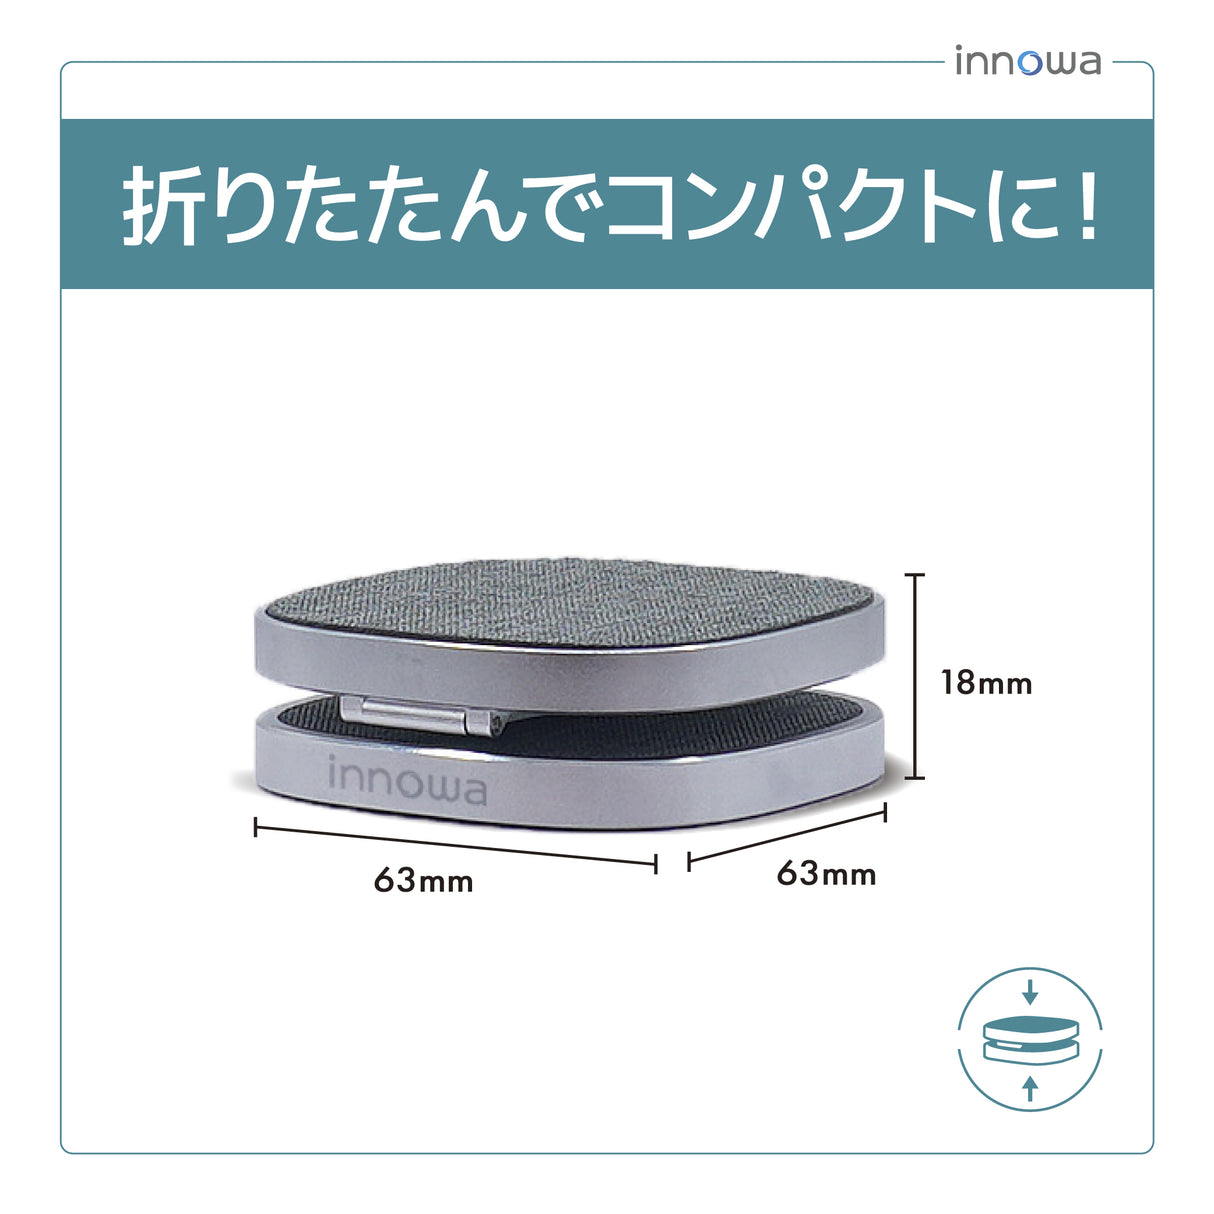 innowa 3in1 ワイヤレス充電ステーション(ACアダプター付属)